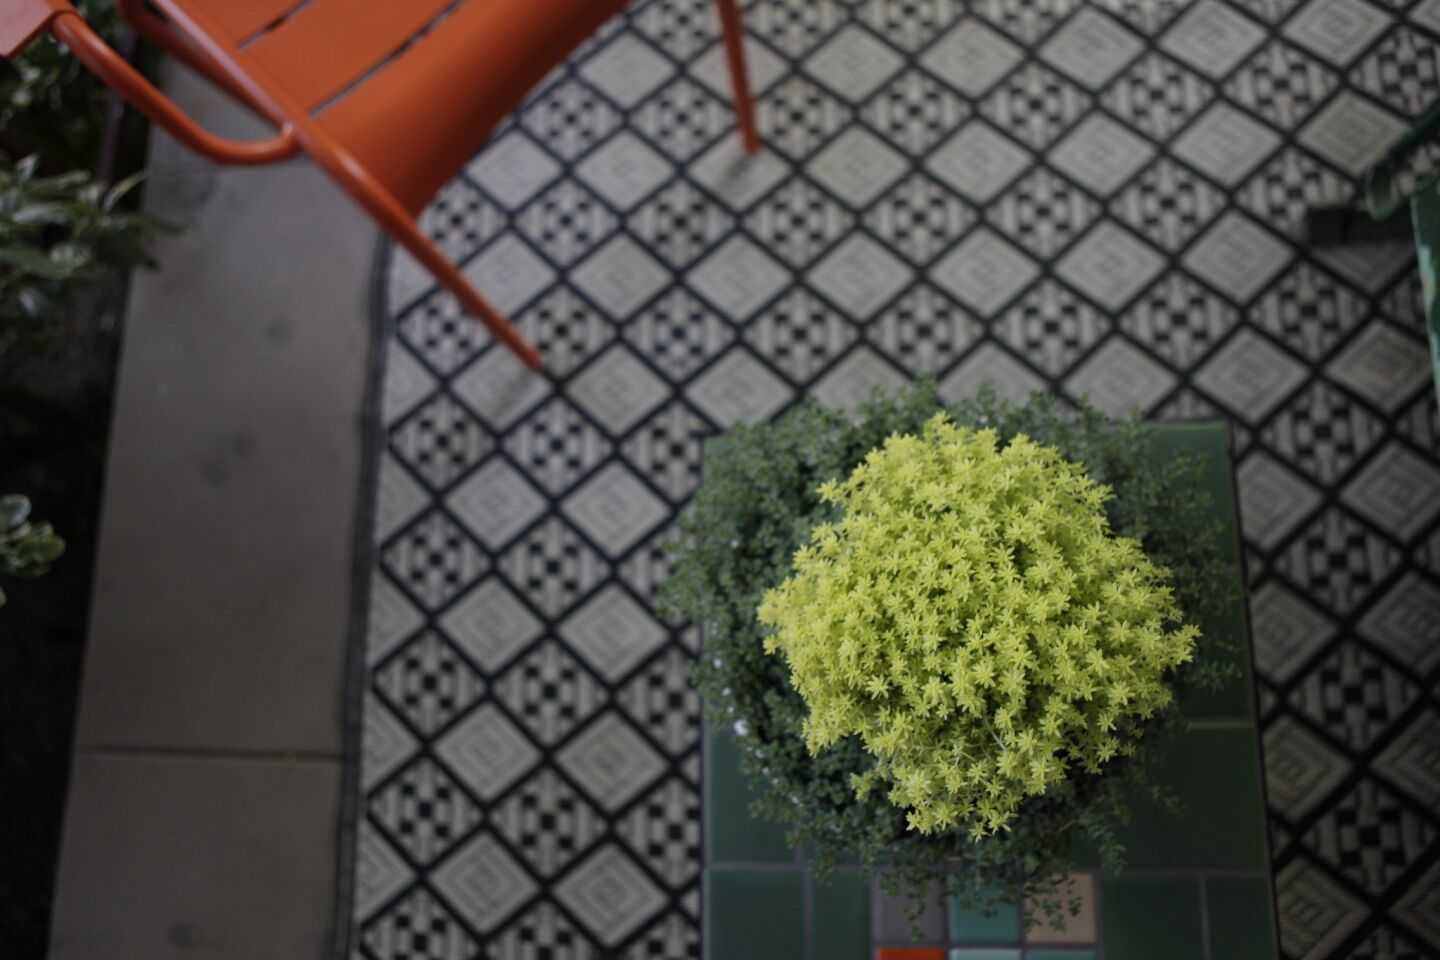 The black-and-white recycled plastic porch rug is reversible, so when the top faded, Gutierrez simply flipped it over. Sedum succulents in two hues grow in a wedding cake planter from Gutierrez's Atwater Village store, Potted.